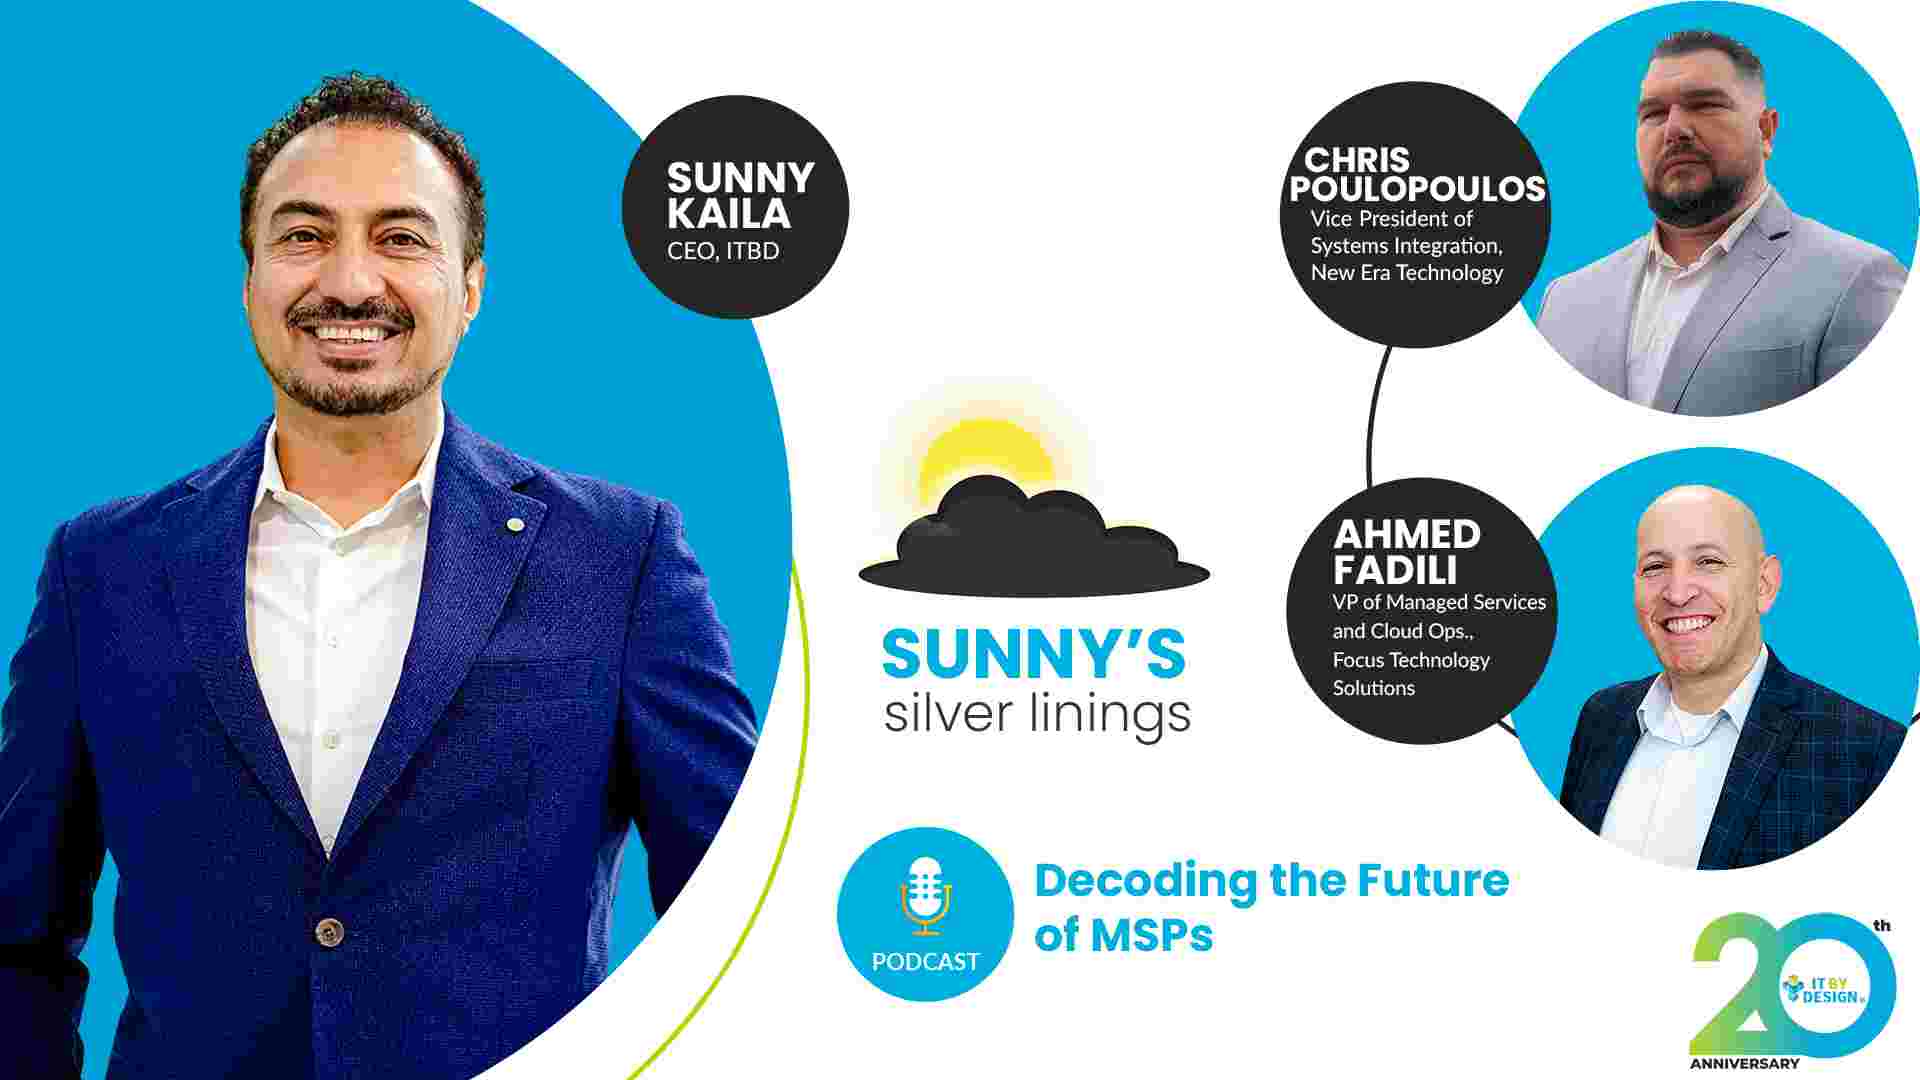 Decoding the Future of MSPs